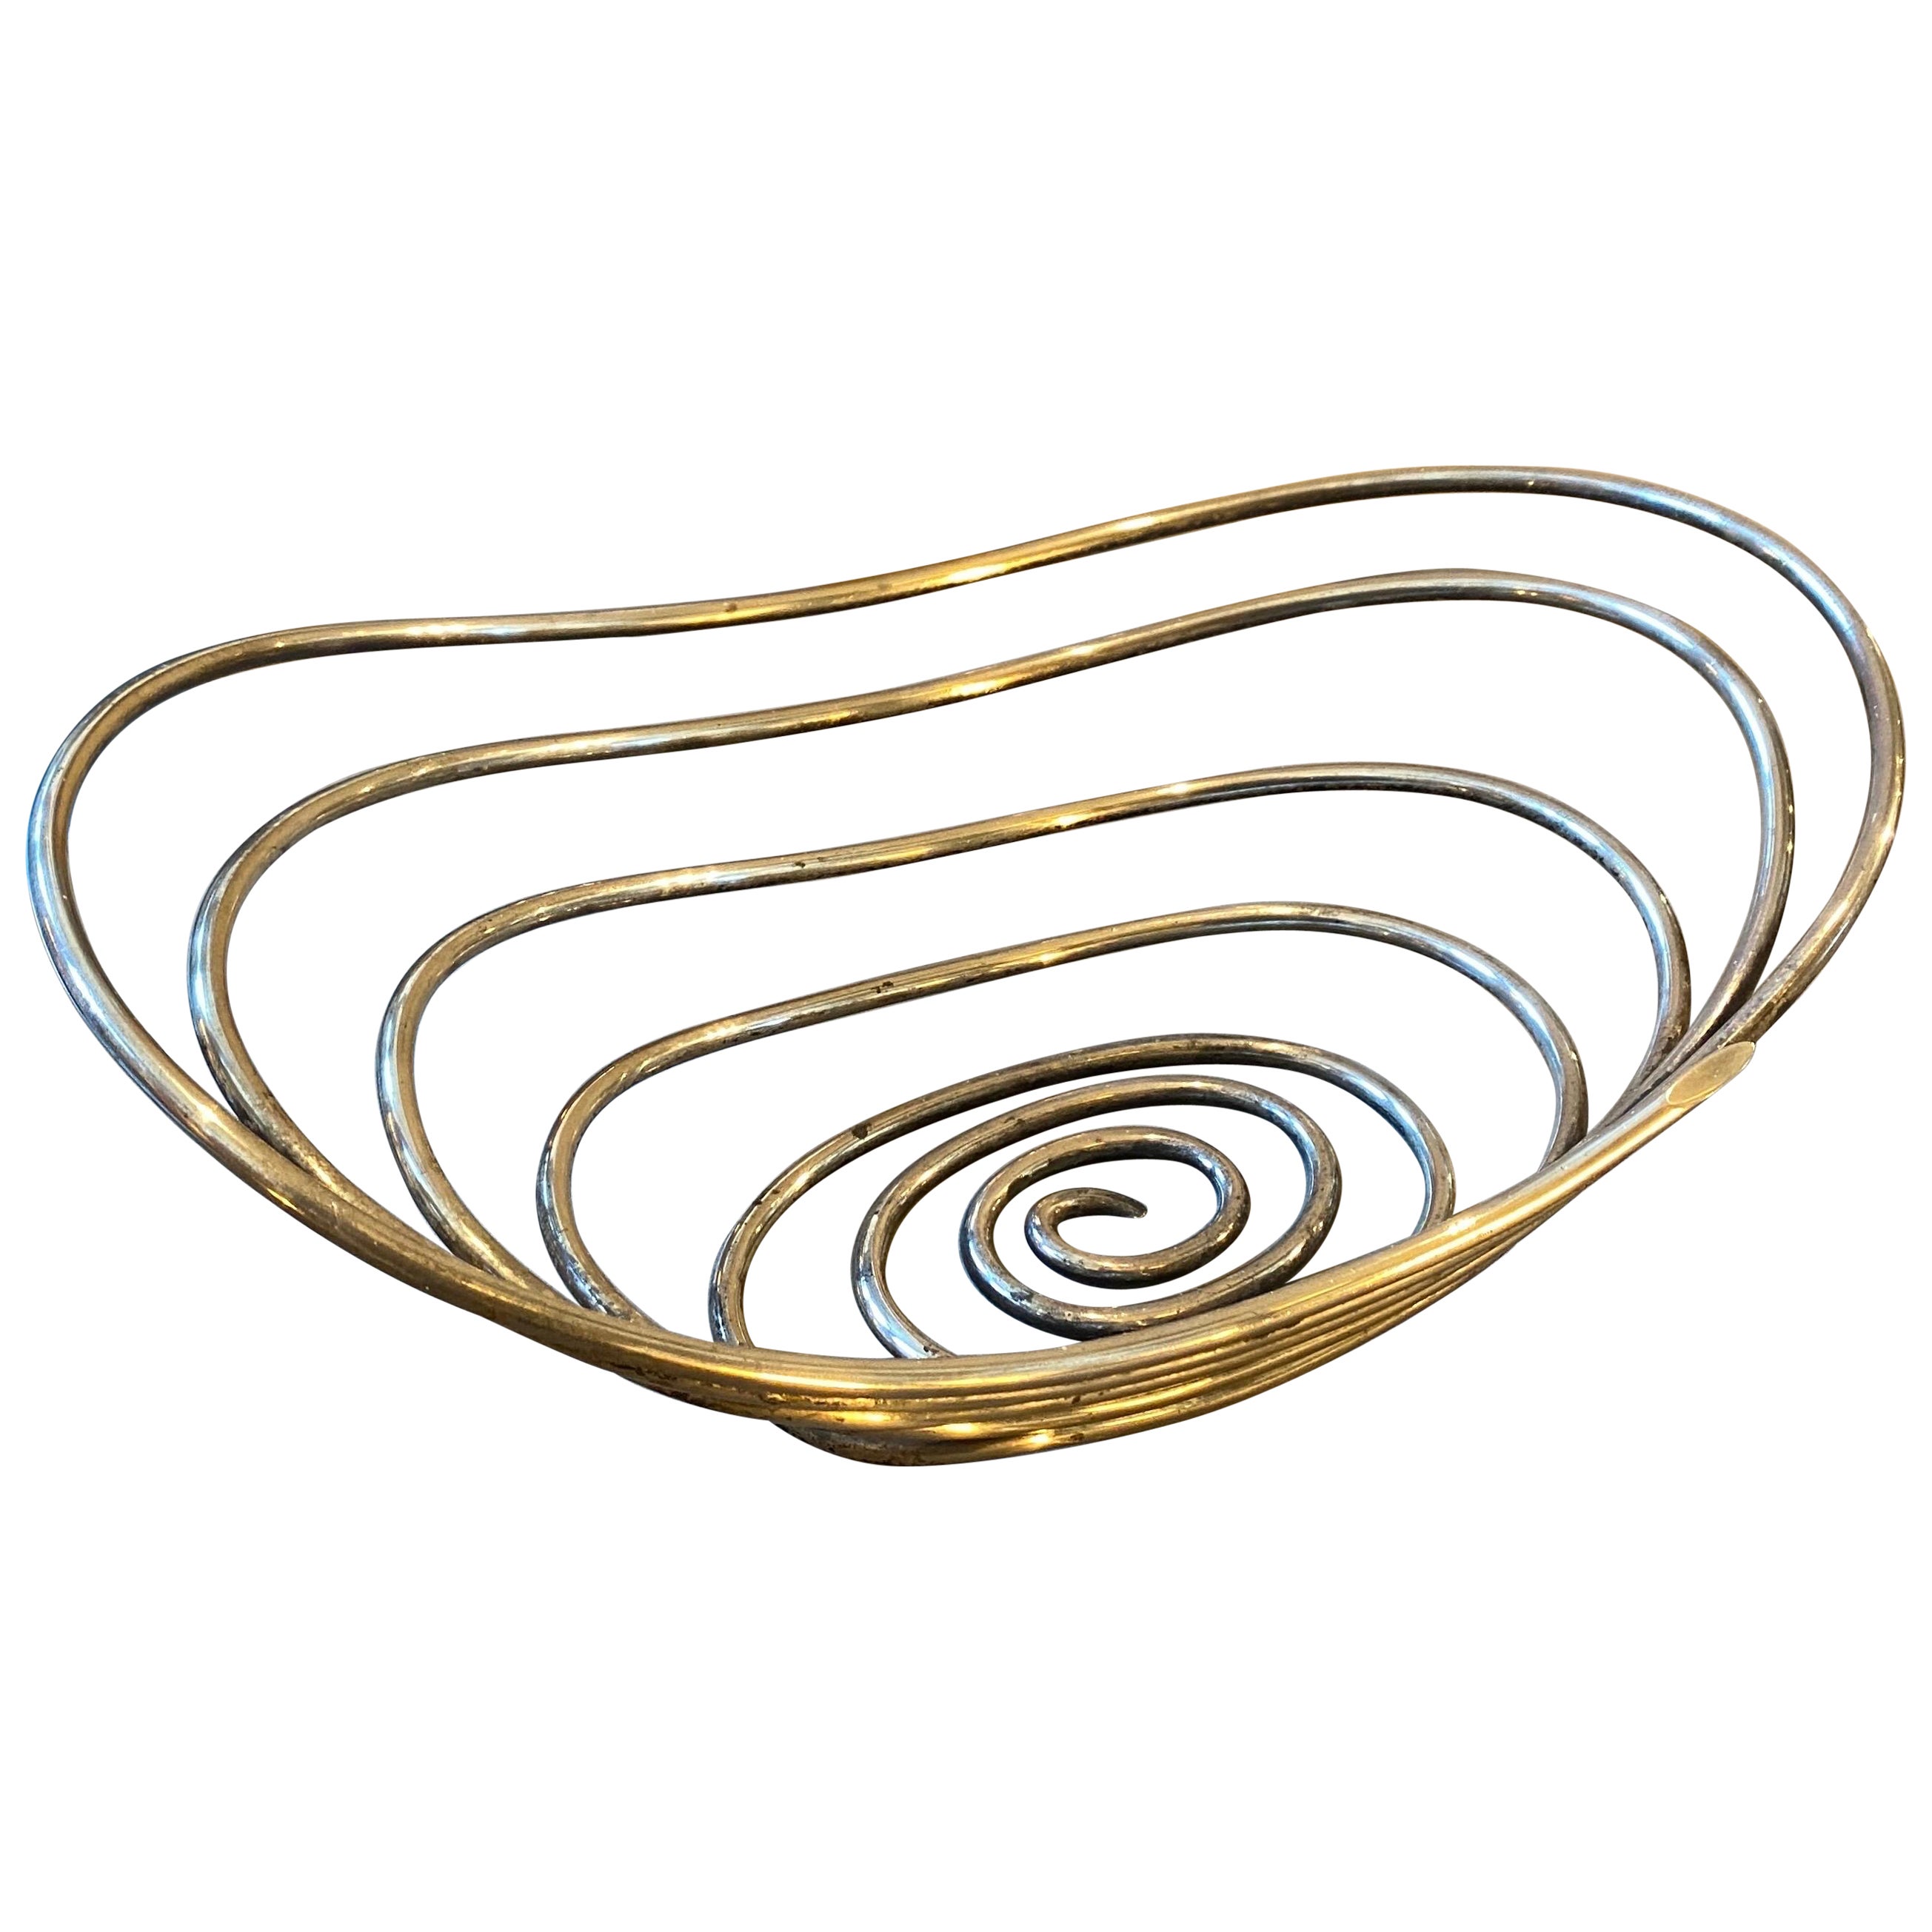 1970s Iconic Modernist Silver Plated Italian Basket Design by Lino Sabattini For Sale